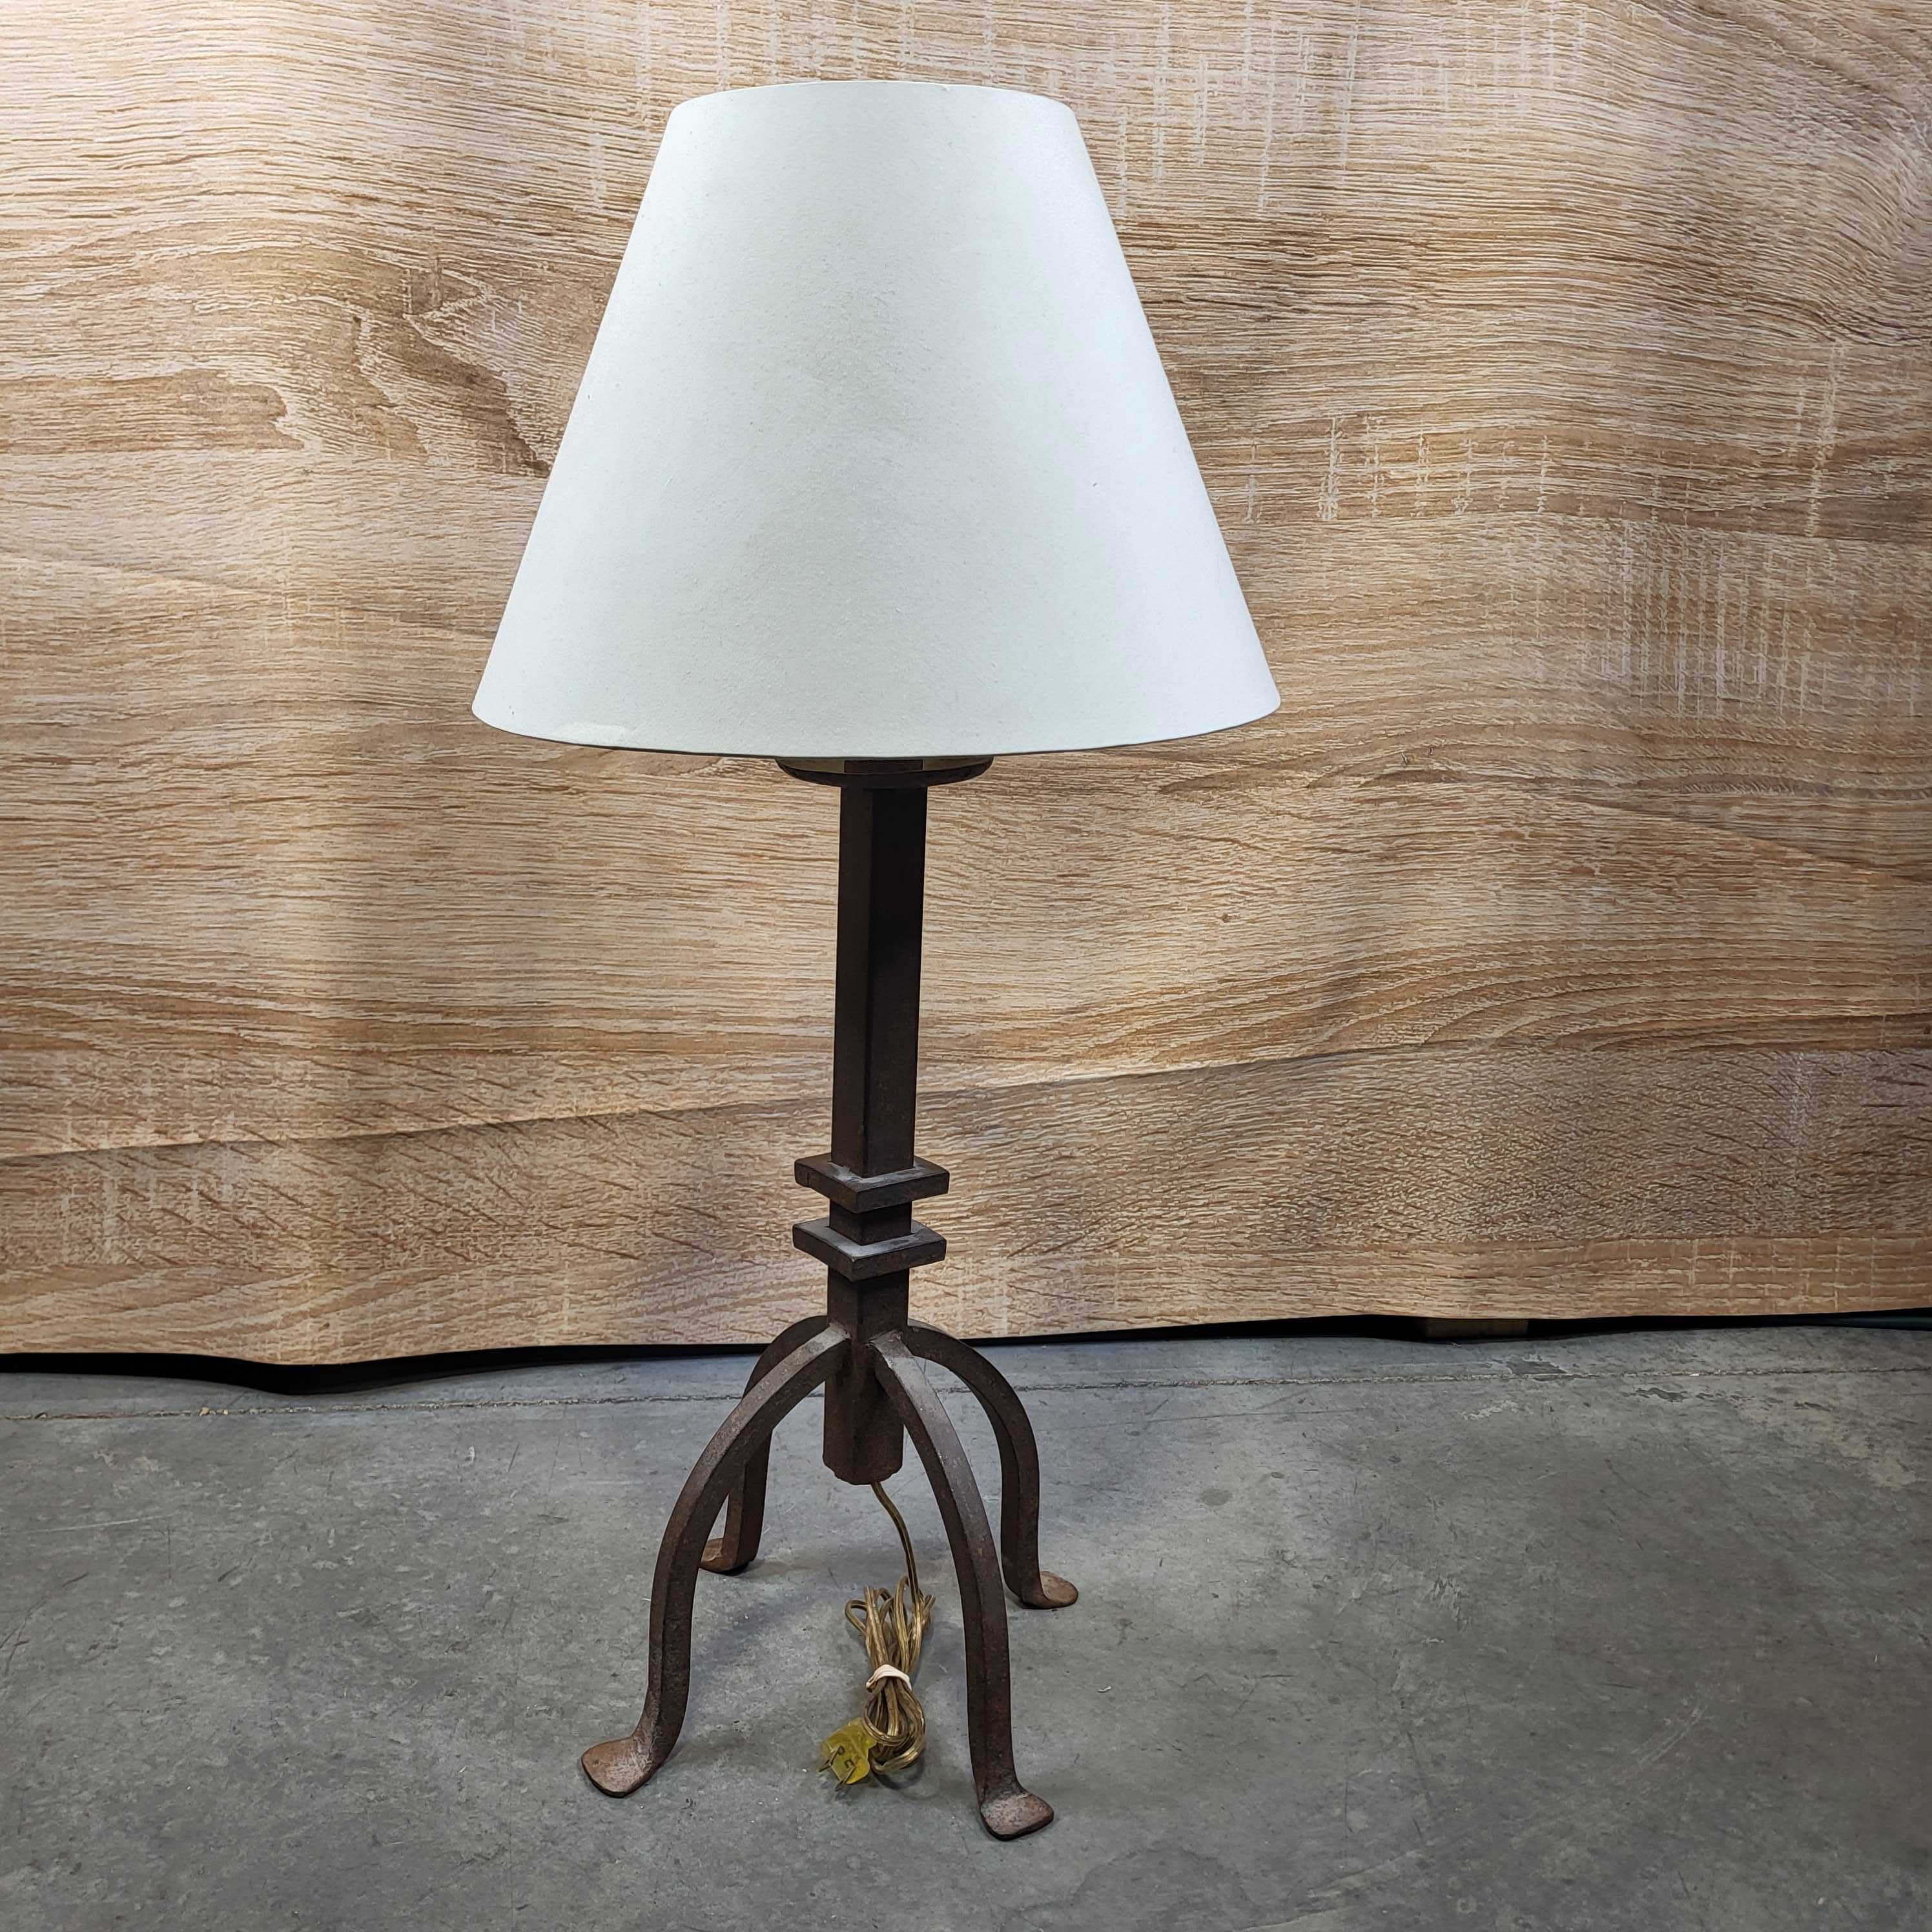 Cast Iron 2 Square Embellishments with Shade Table Lamp